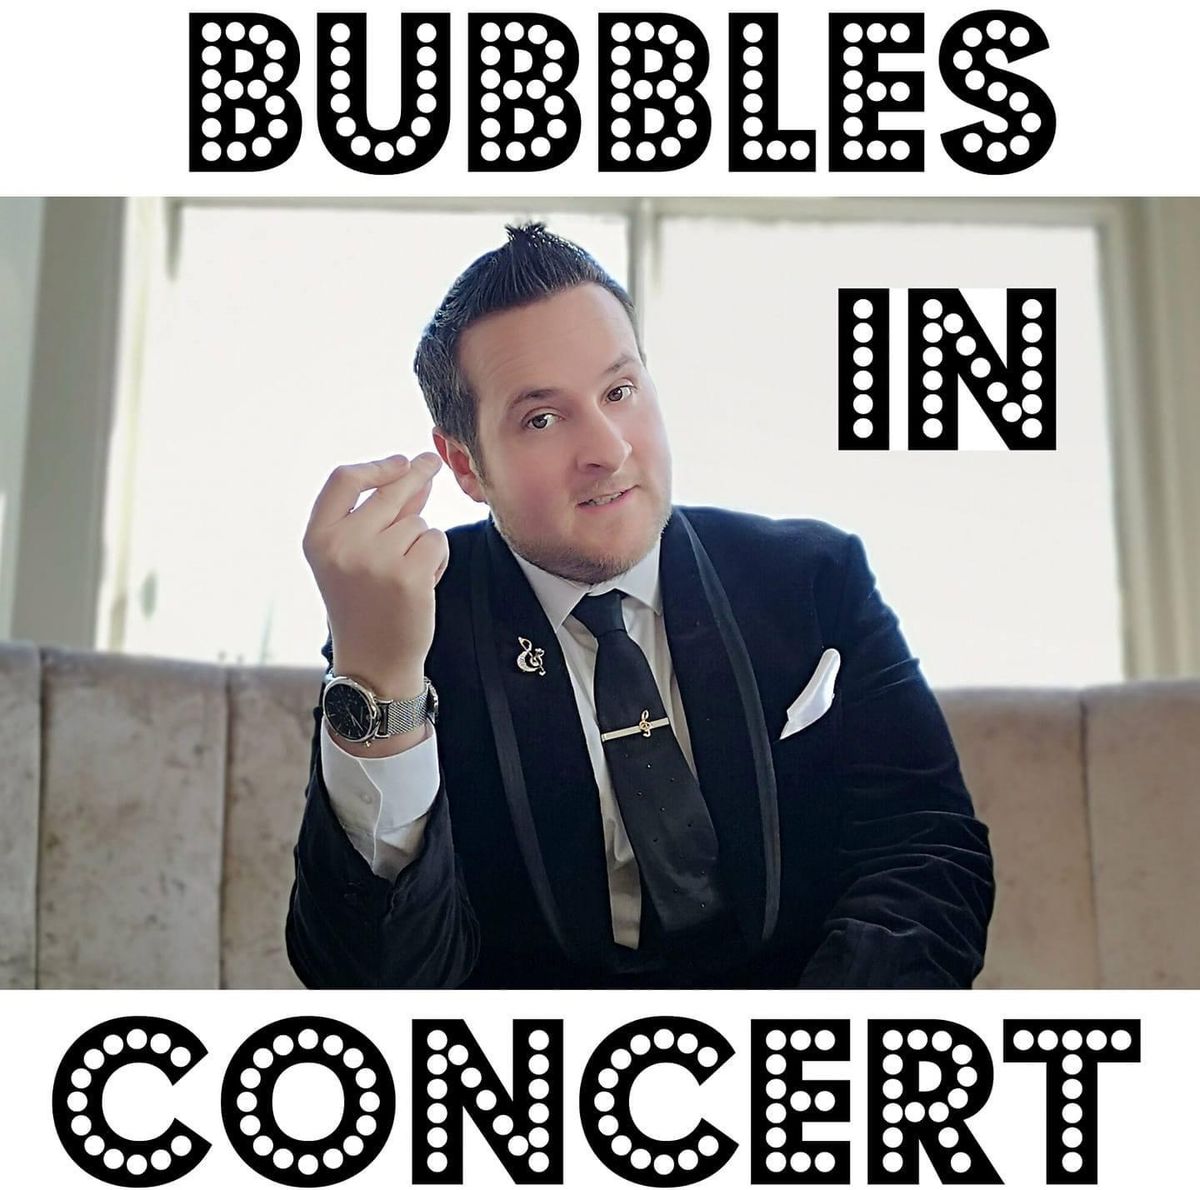 Bubbles in Concert. A tribute to Michael Buble at KCC